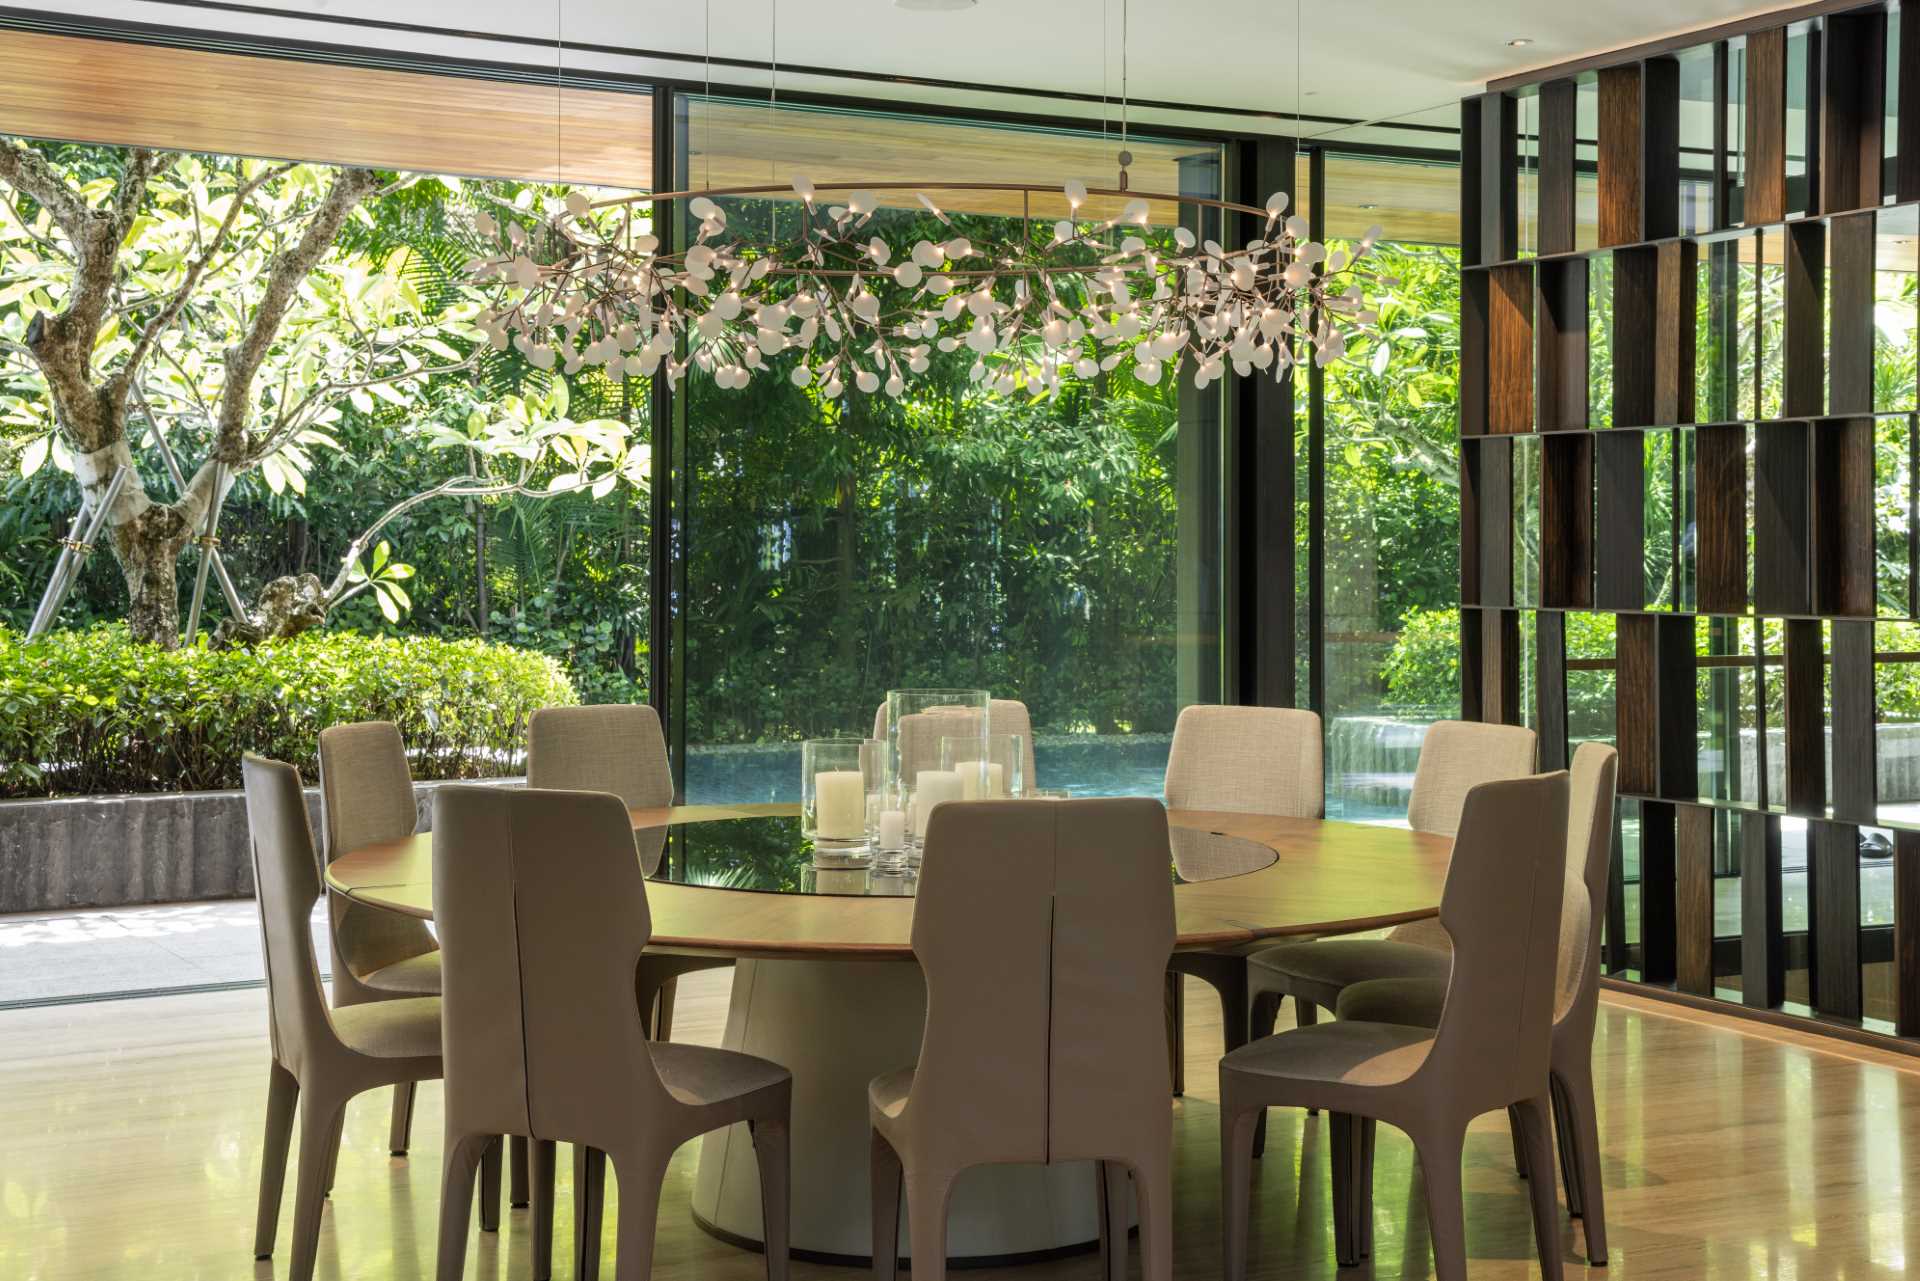 A modern dining room has glass walls that open to the outdoors.